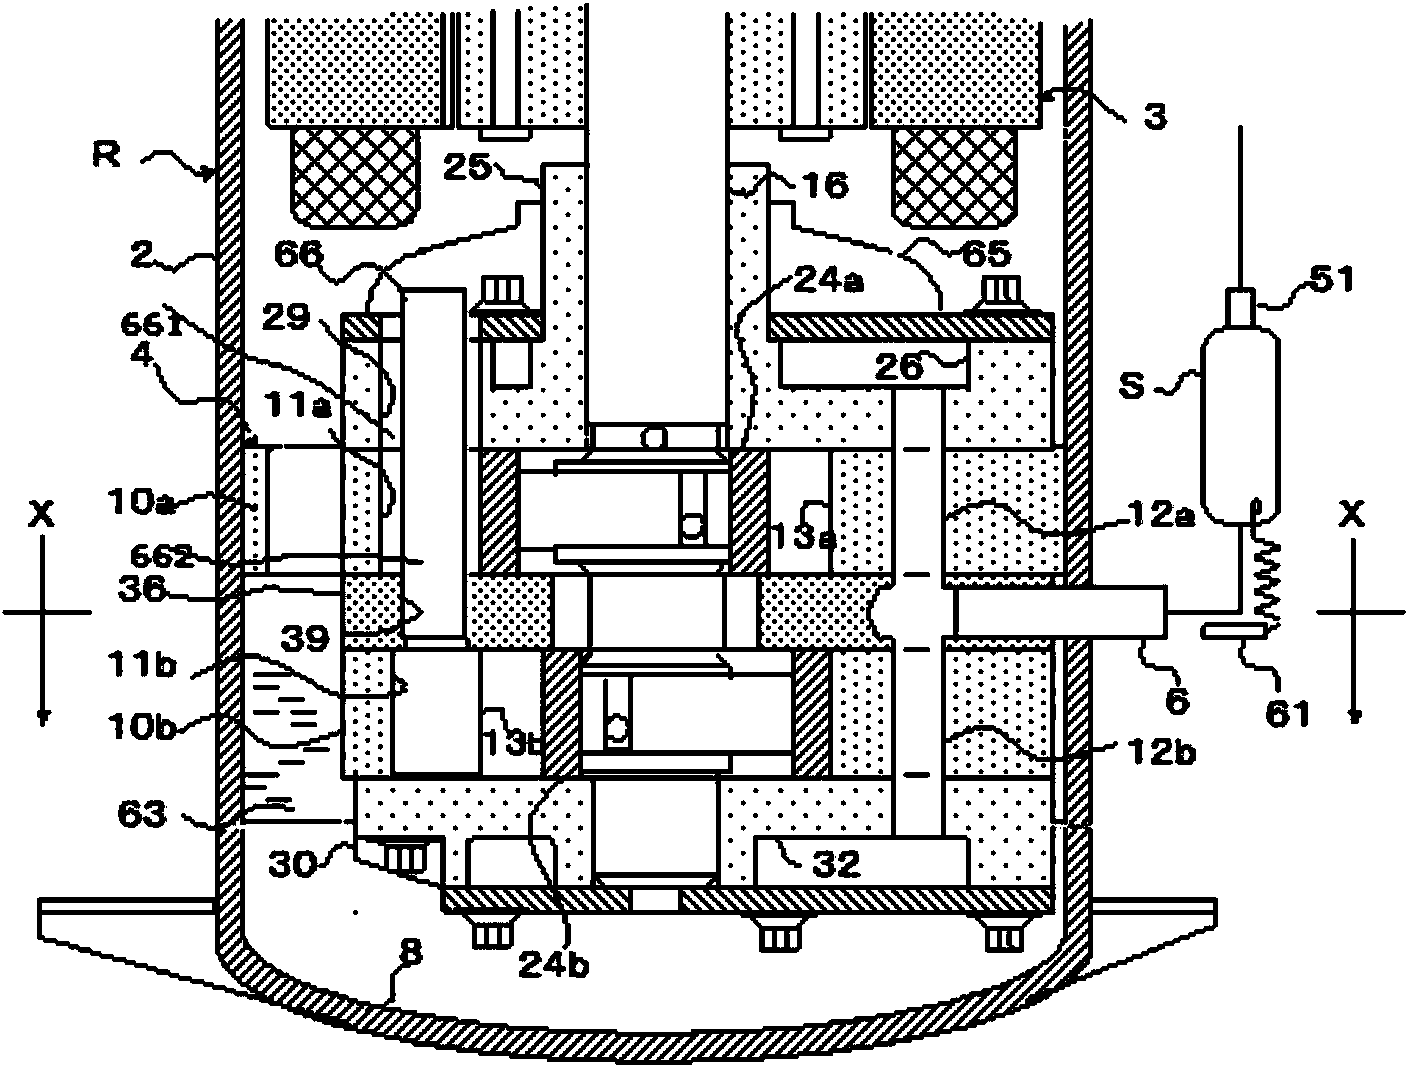 Rotary compressor and refrigerating circulating system with same